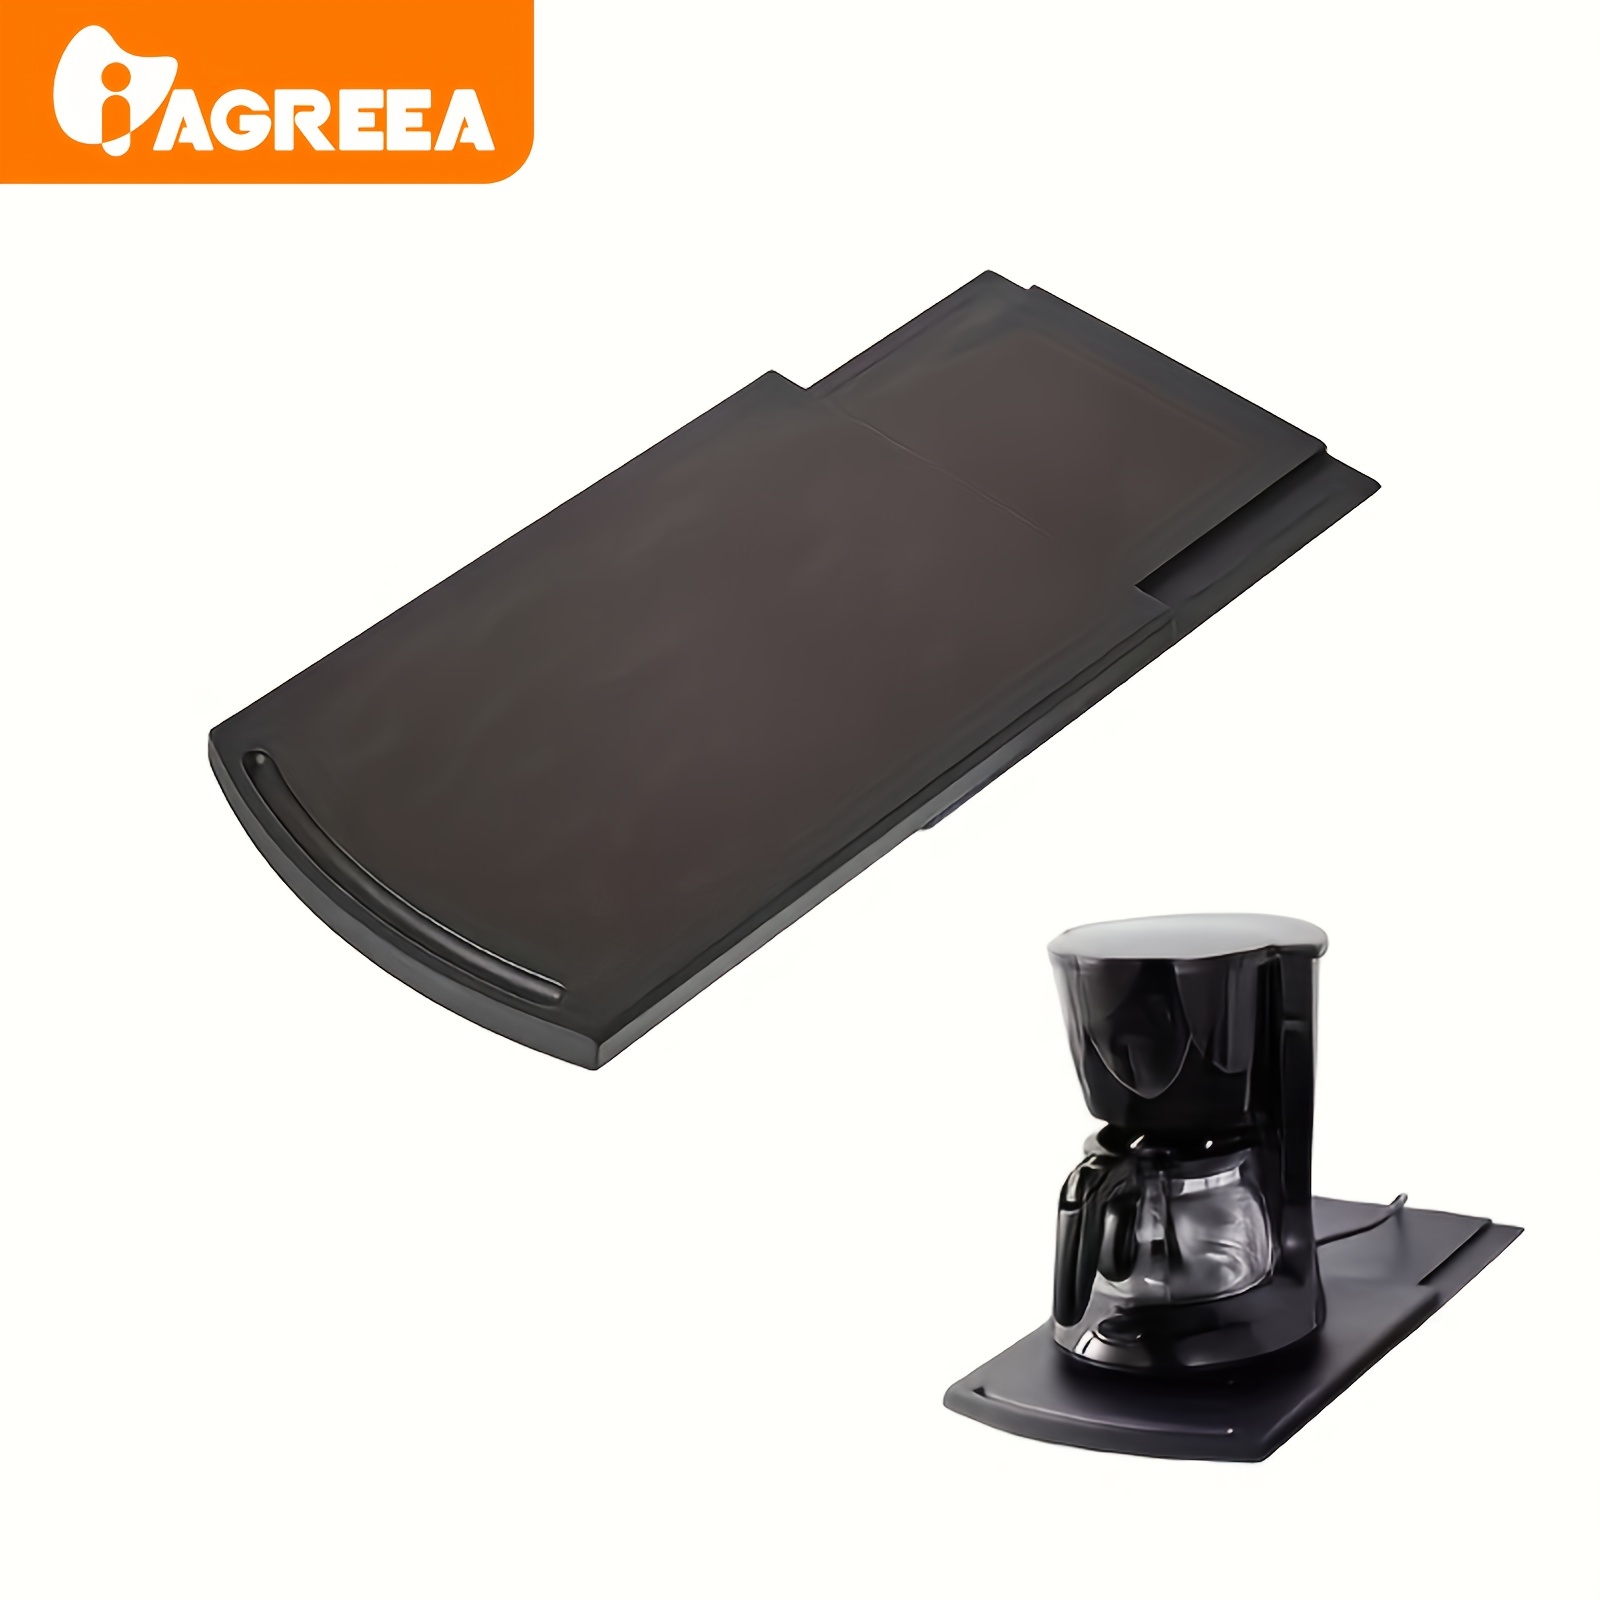 Sliding Coffee Maker Tray Mat Countertop Coffee Machine Appliance Moving  Holder